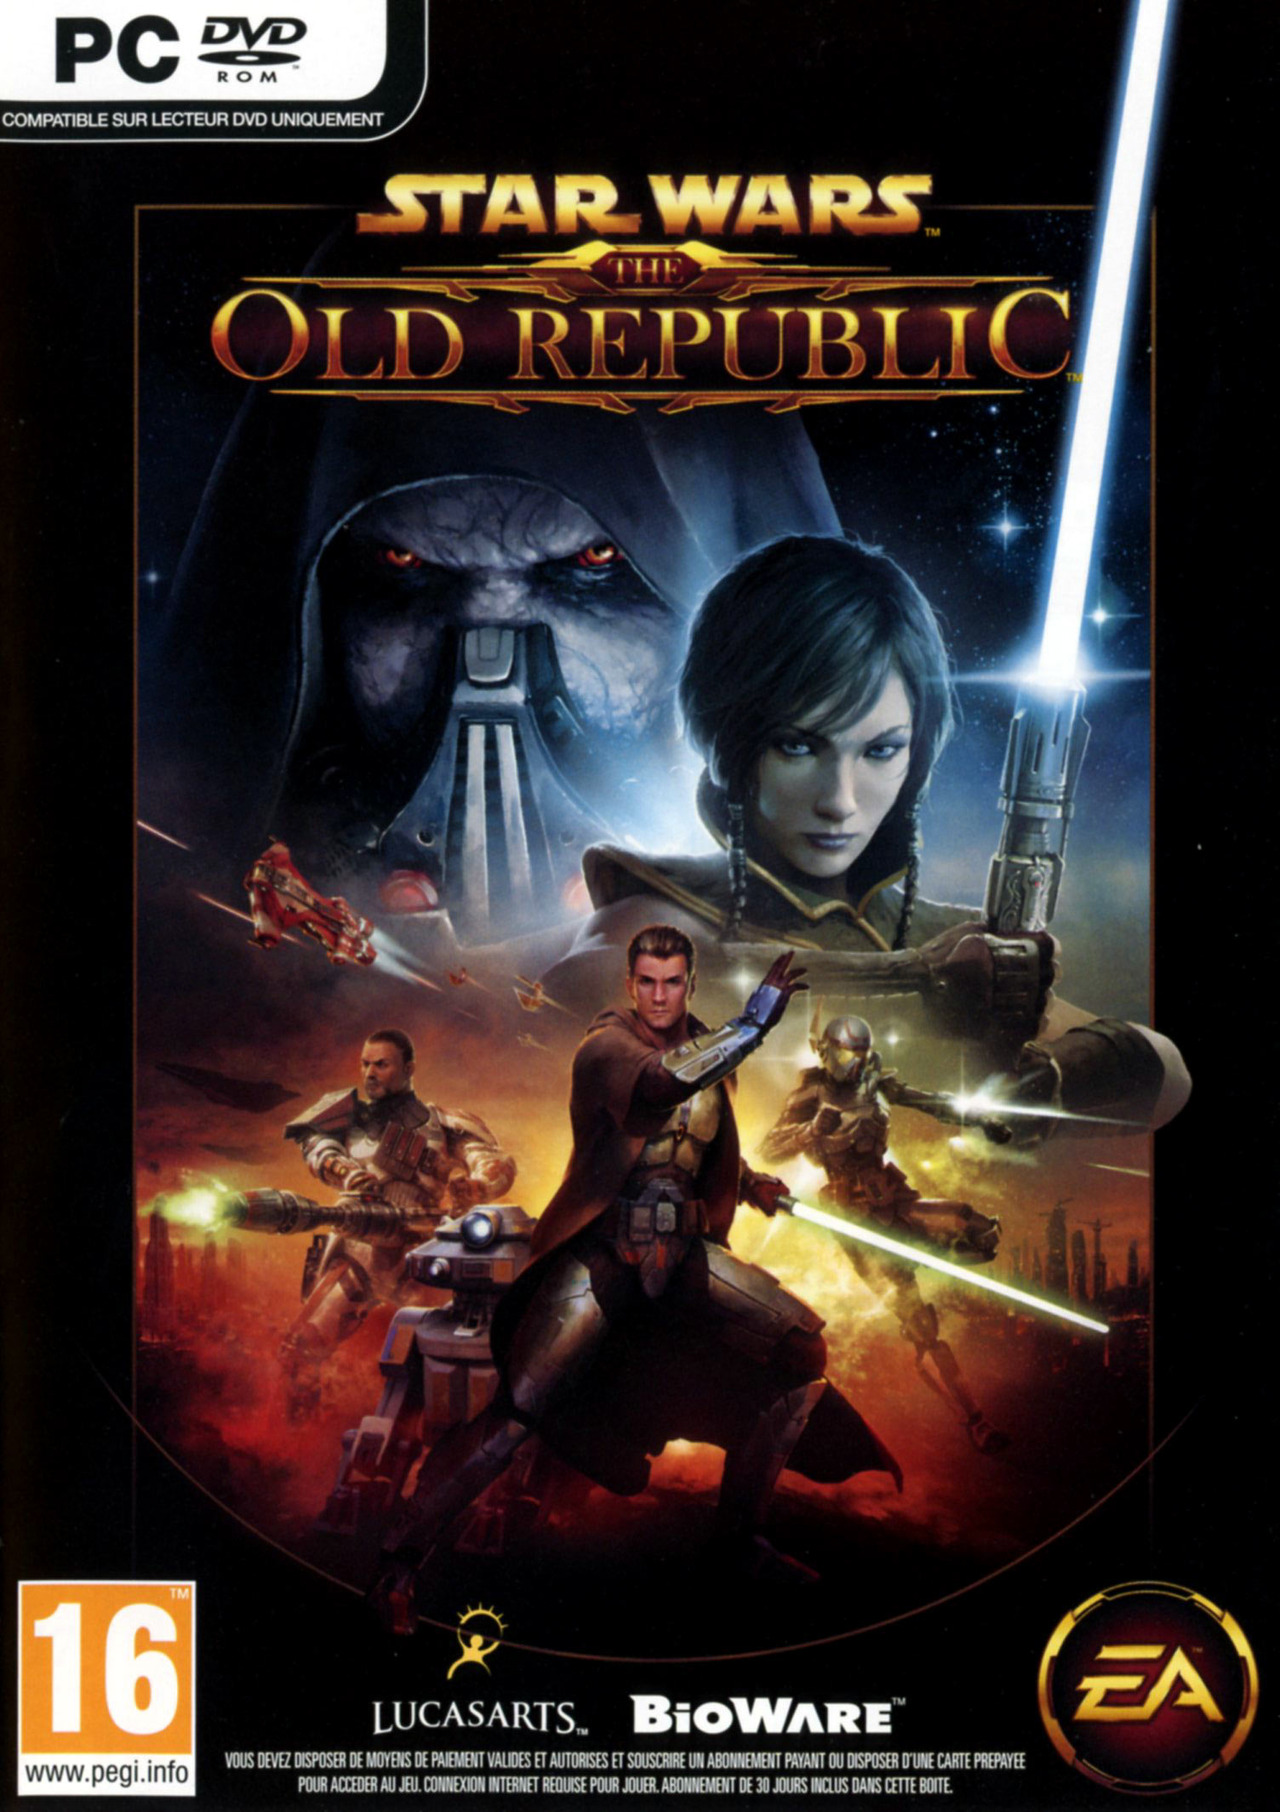 jaquette-star-wars-the-old-republic-pc-cover-avant-g-1323870805.jpg, 514kB